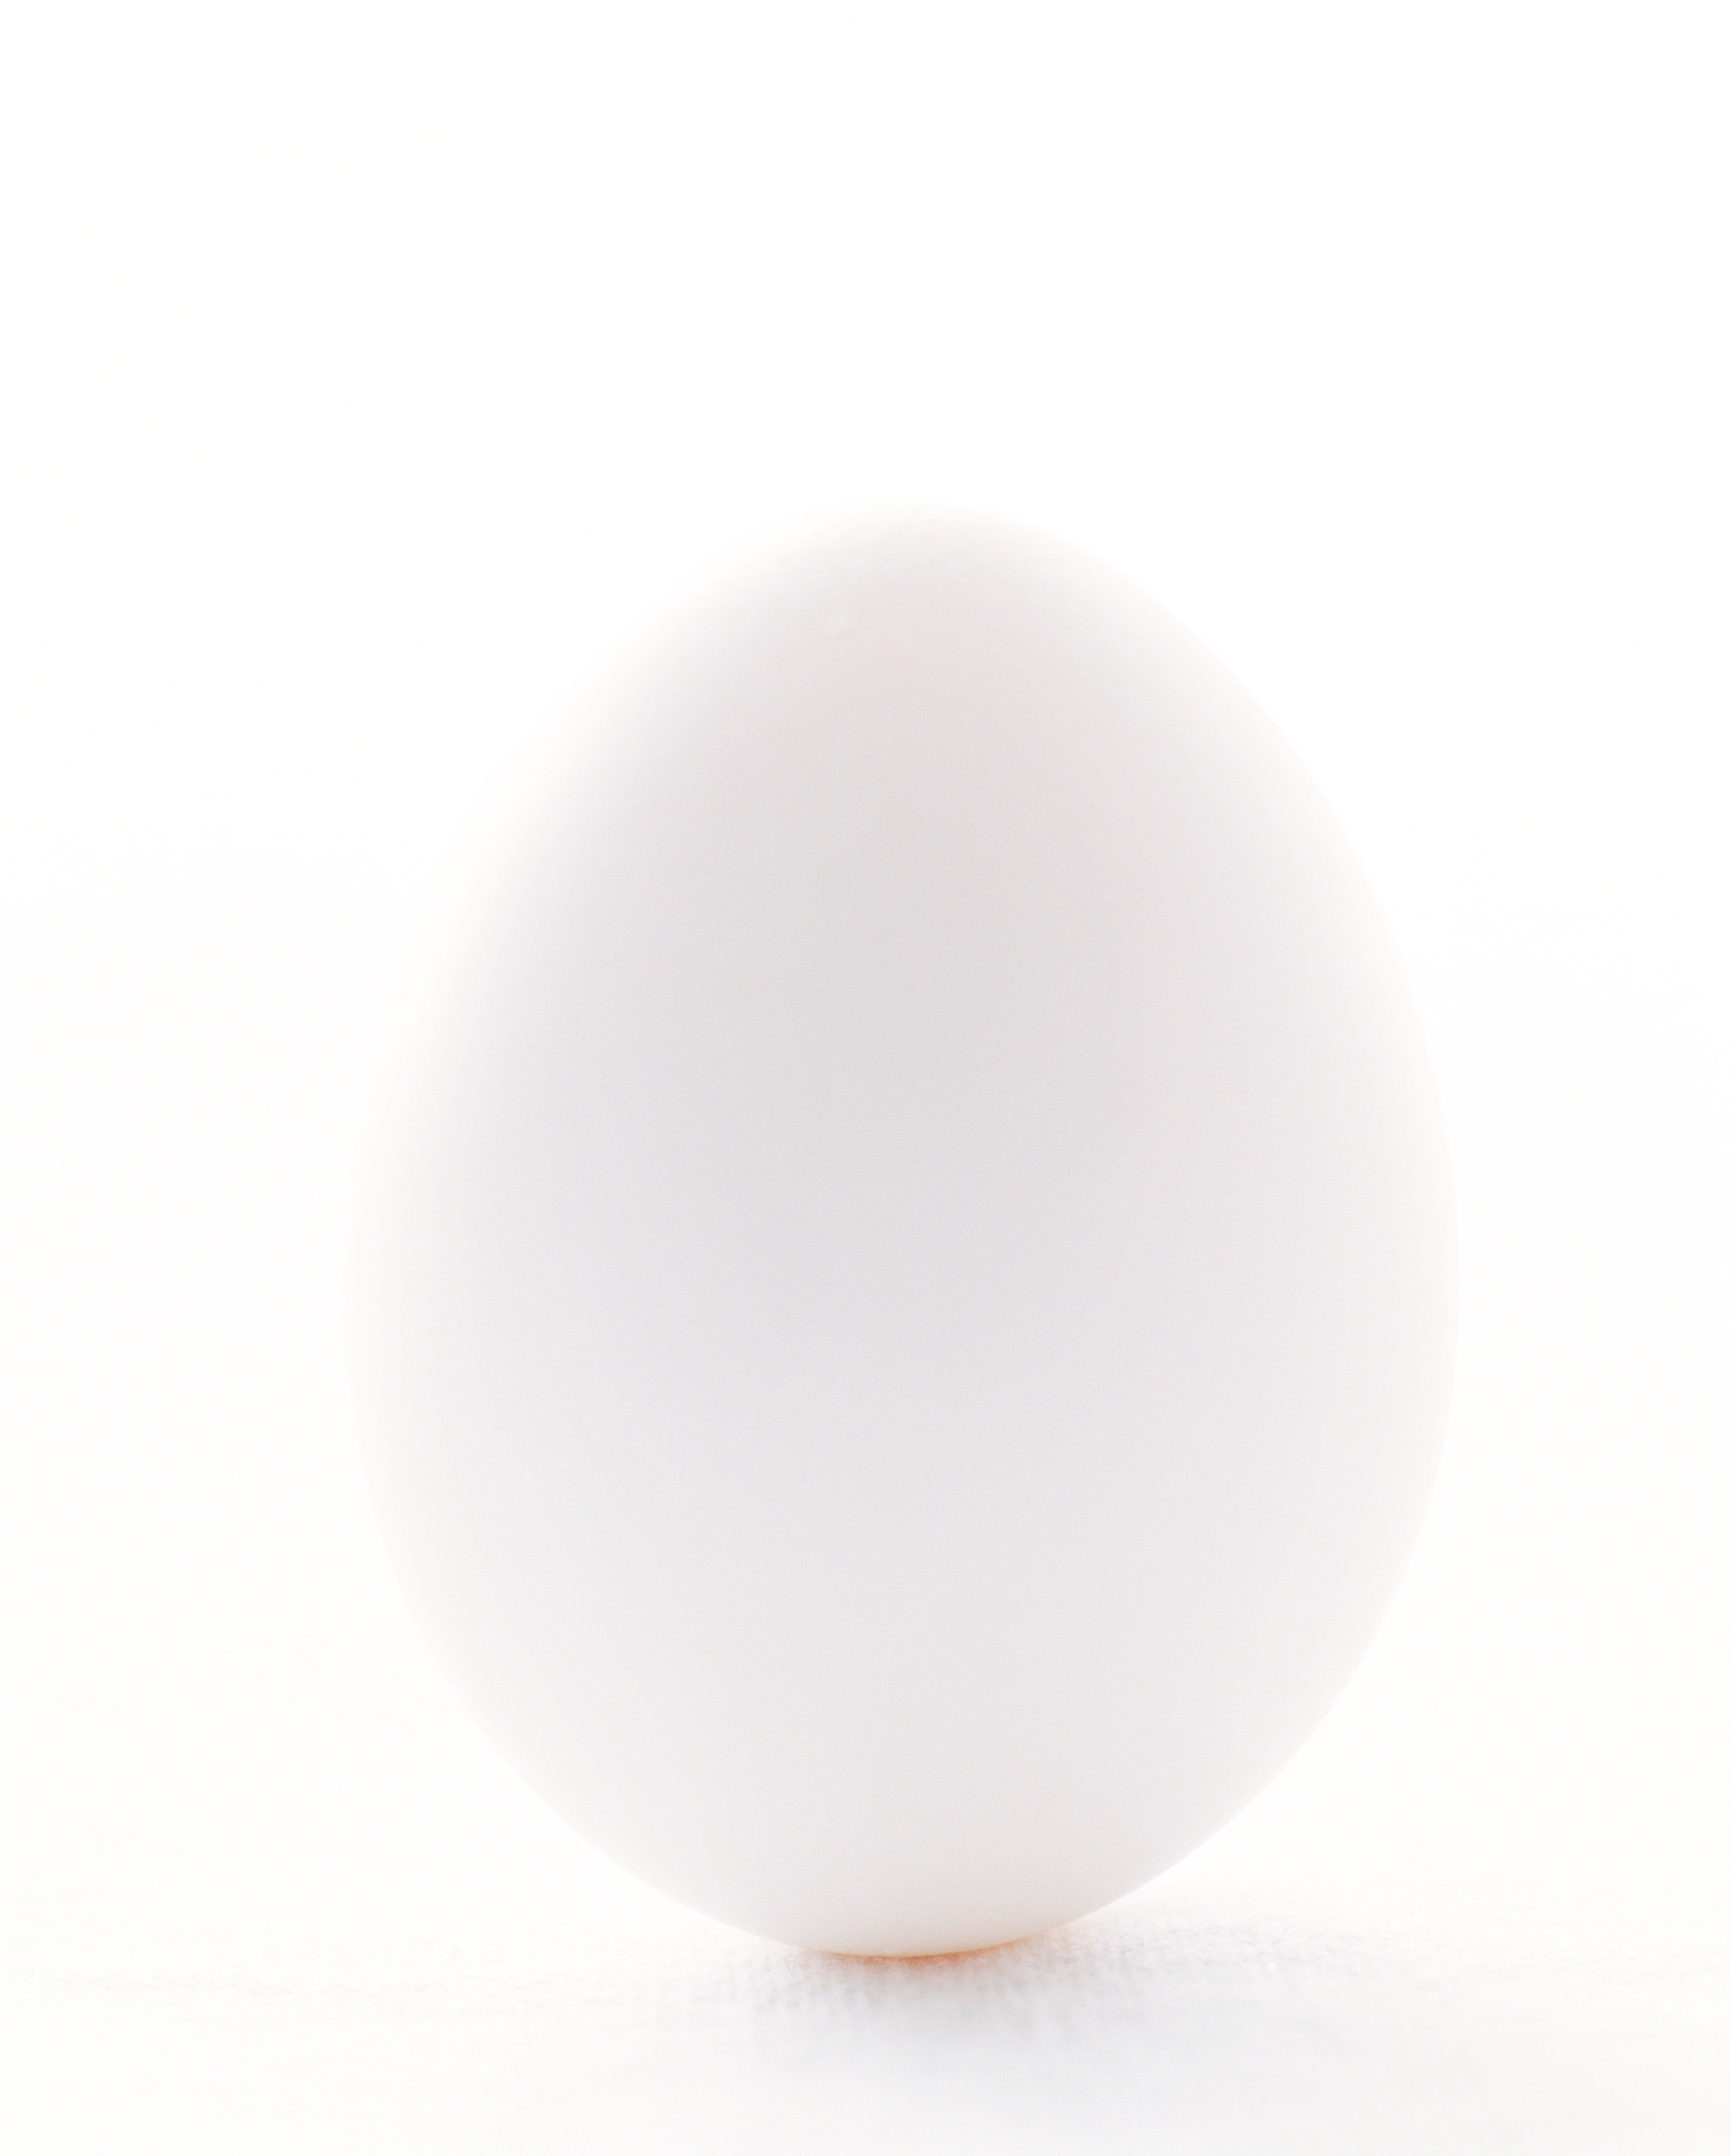 7_egg.png